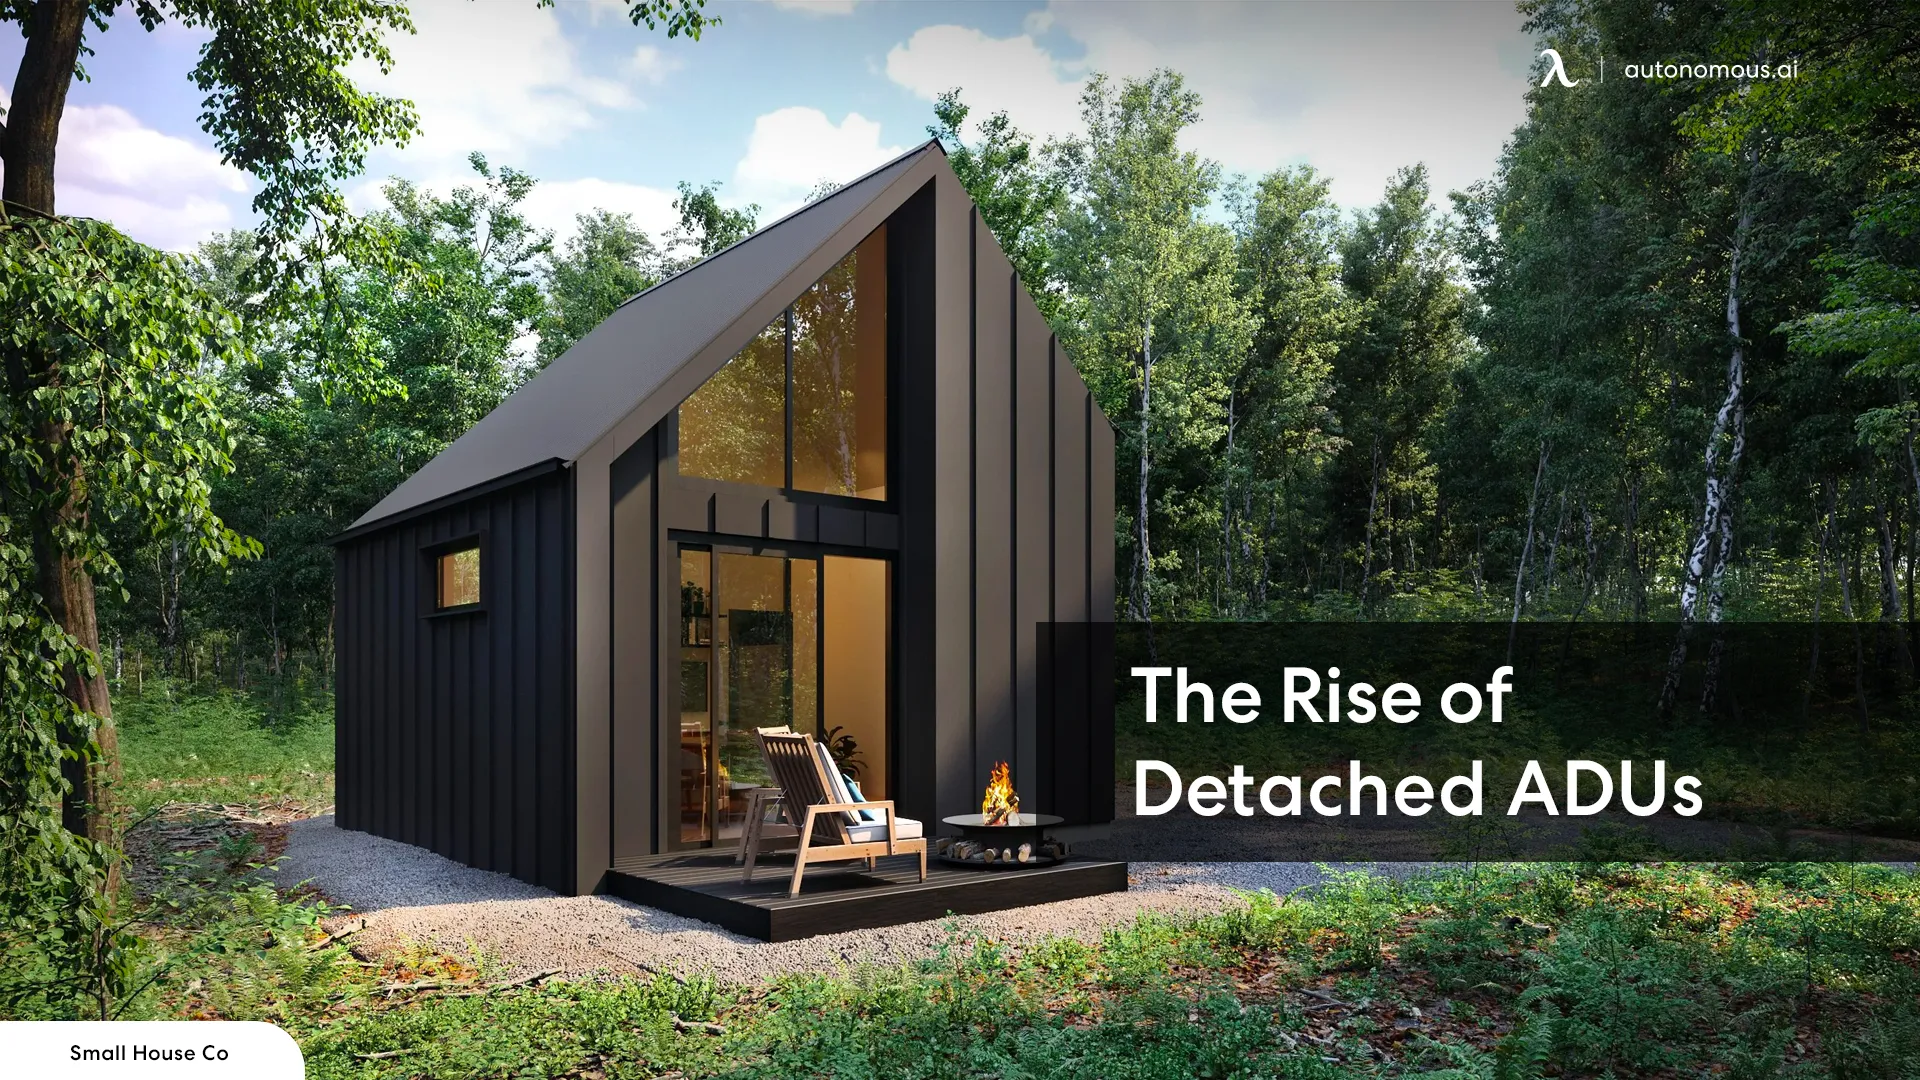 The Rise of Detached ADUs as an Affordable Housing Solution